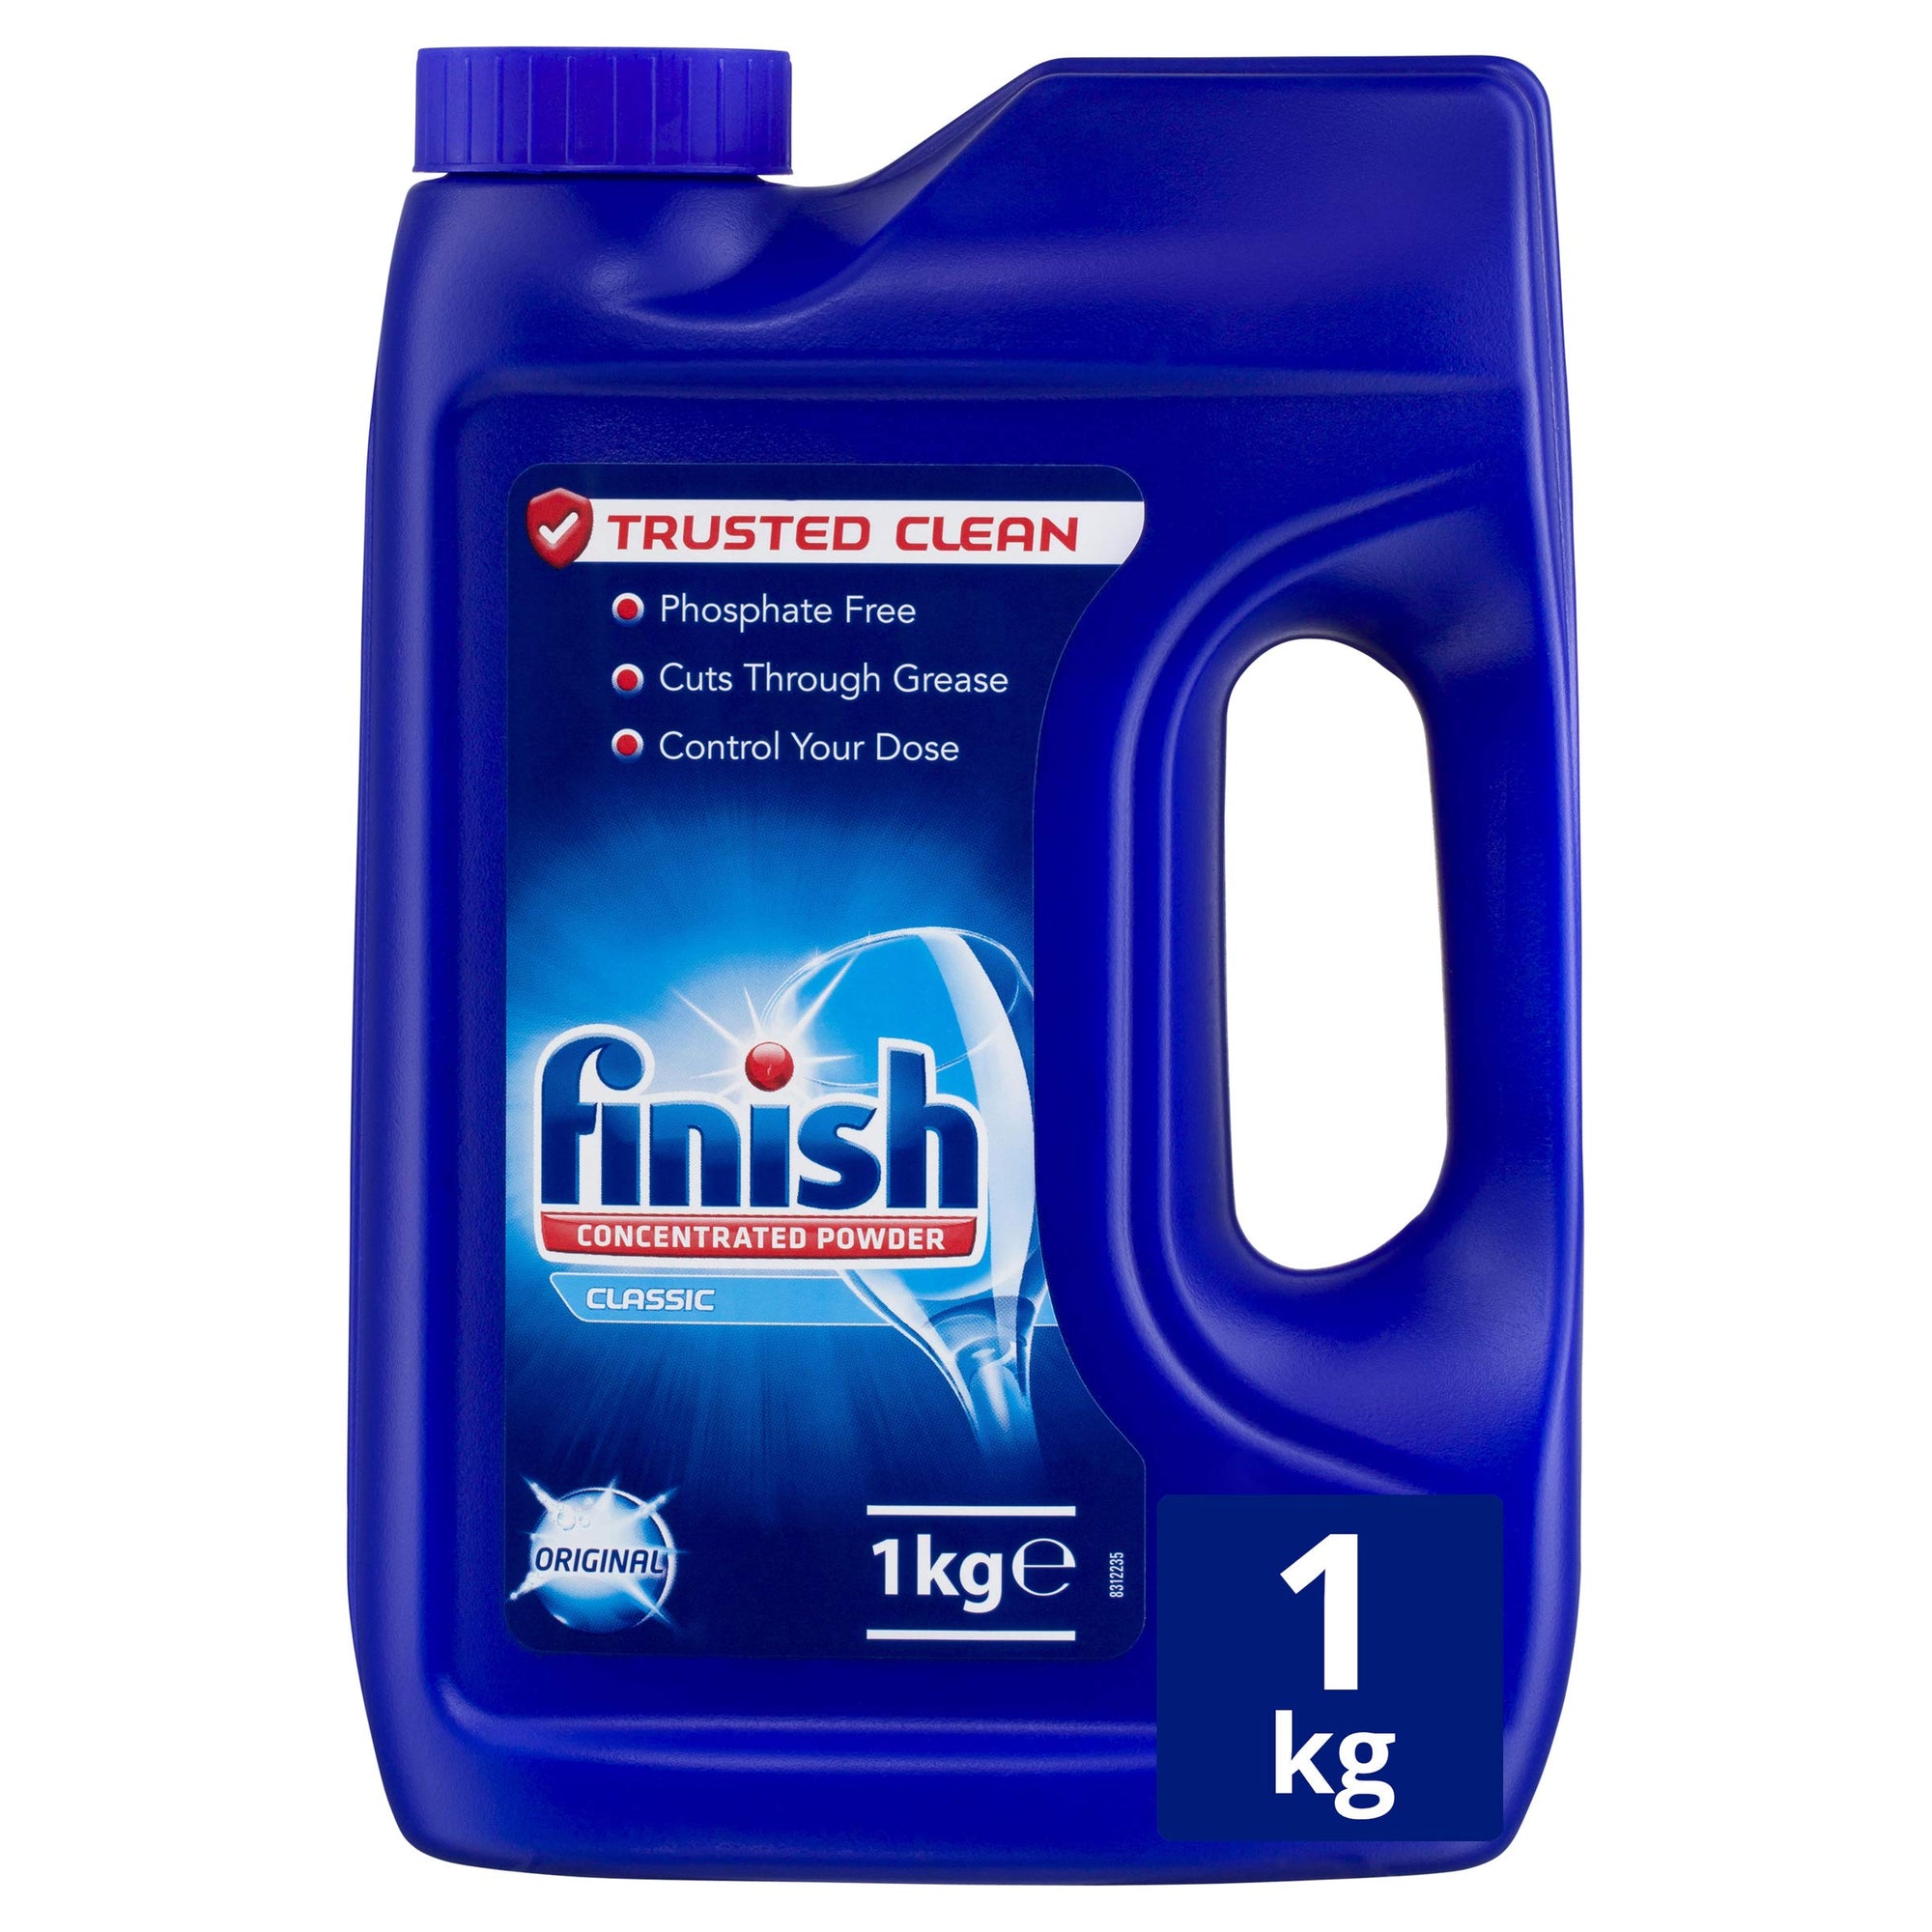 Finish Concentrated Powder 1kg